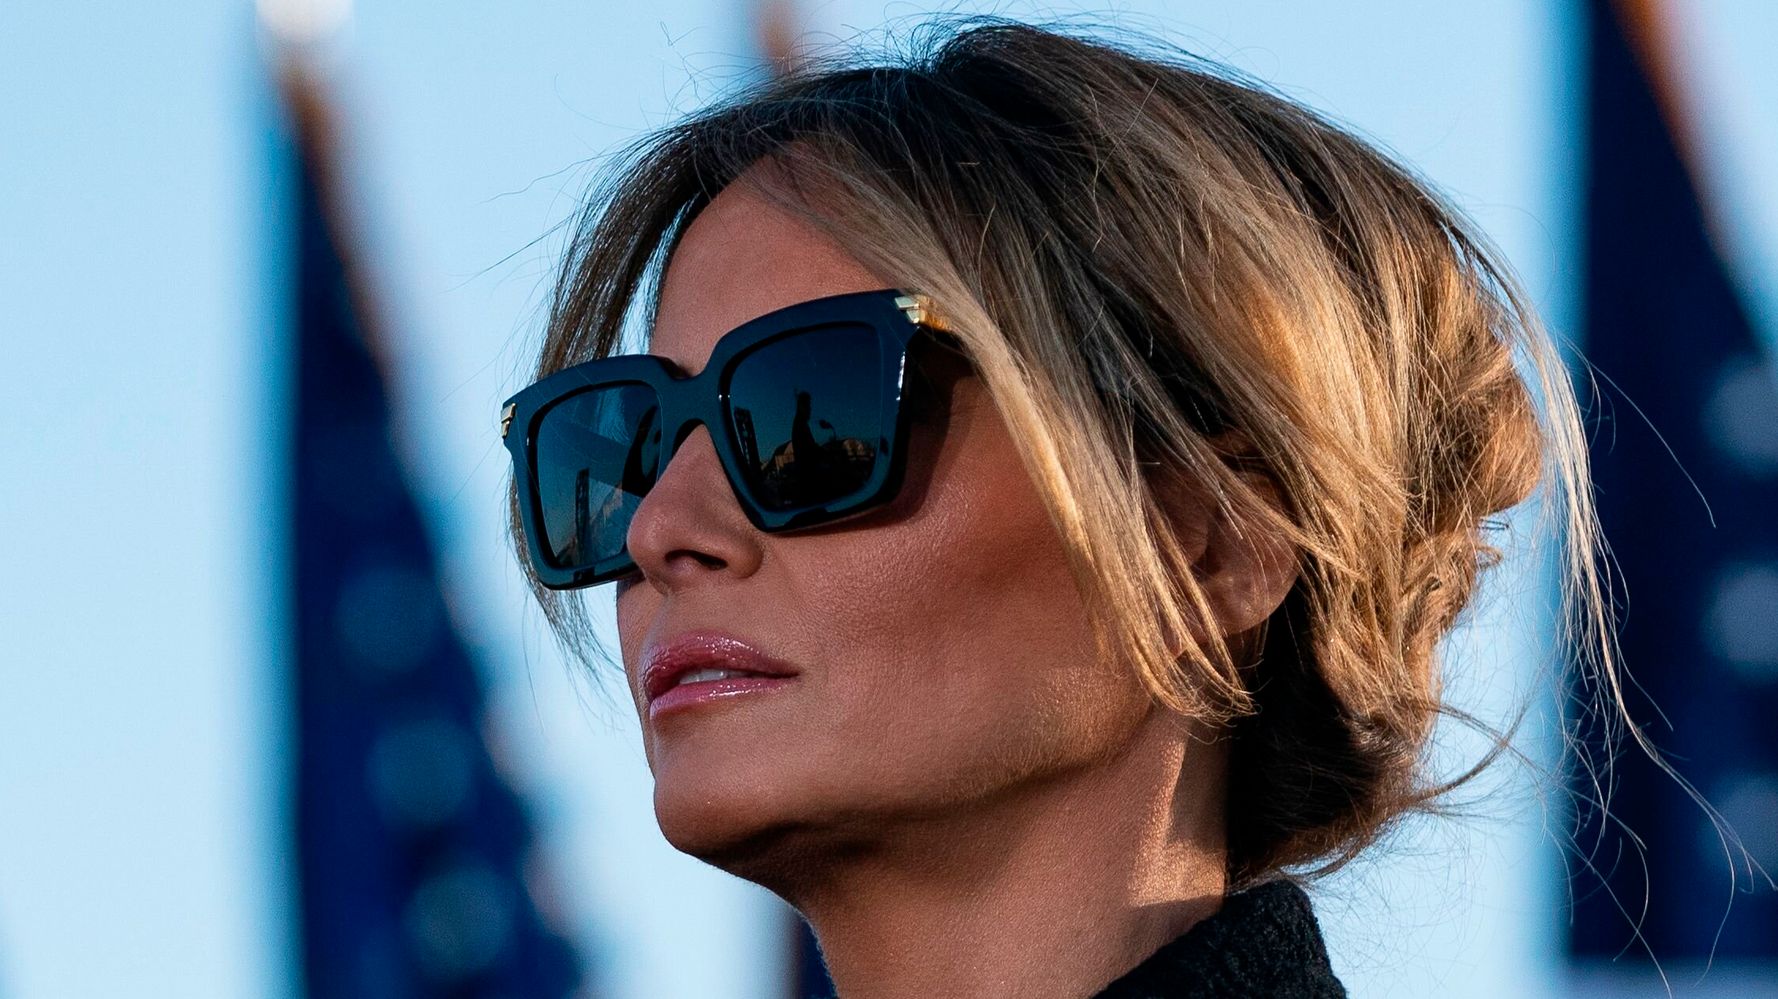 Melania Trump Scorches Tell-All Author Stephanie Grisham As 'Troubled And Deceitful'